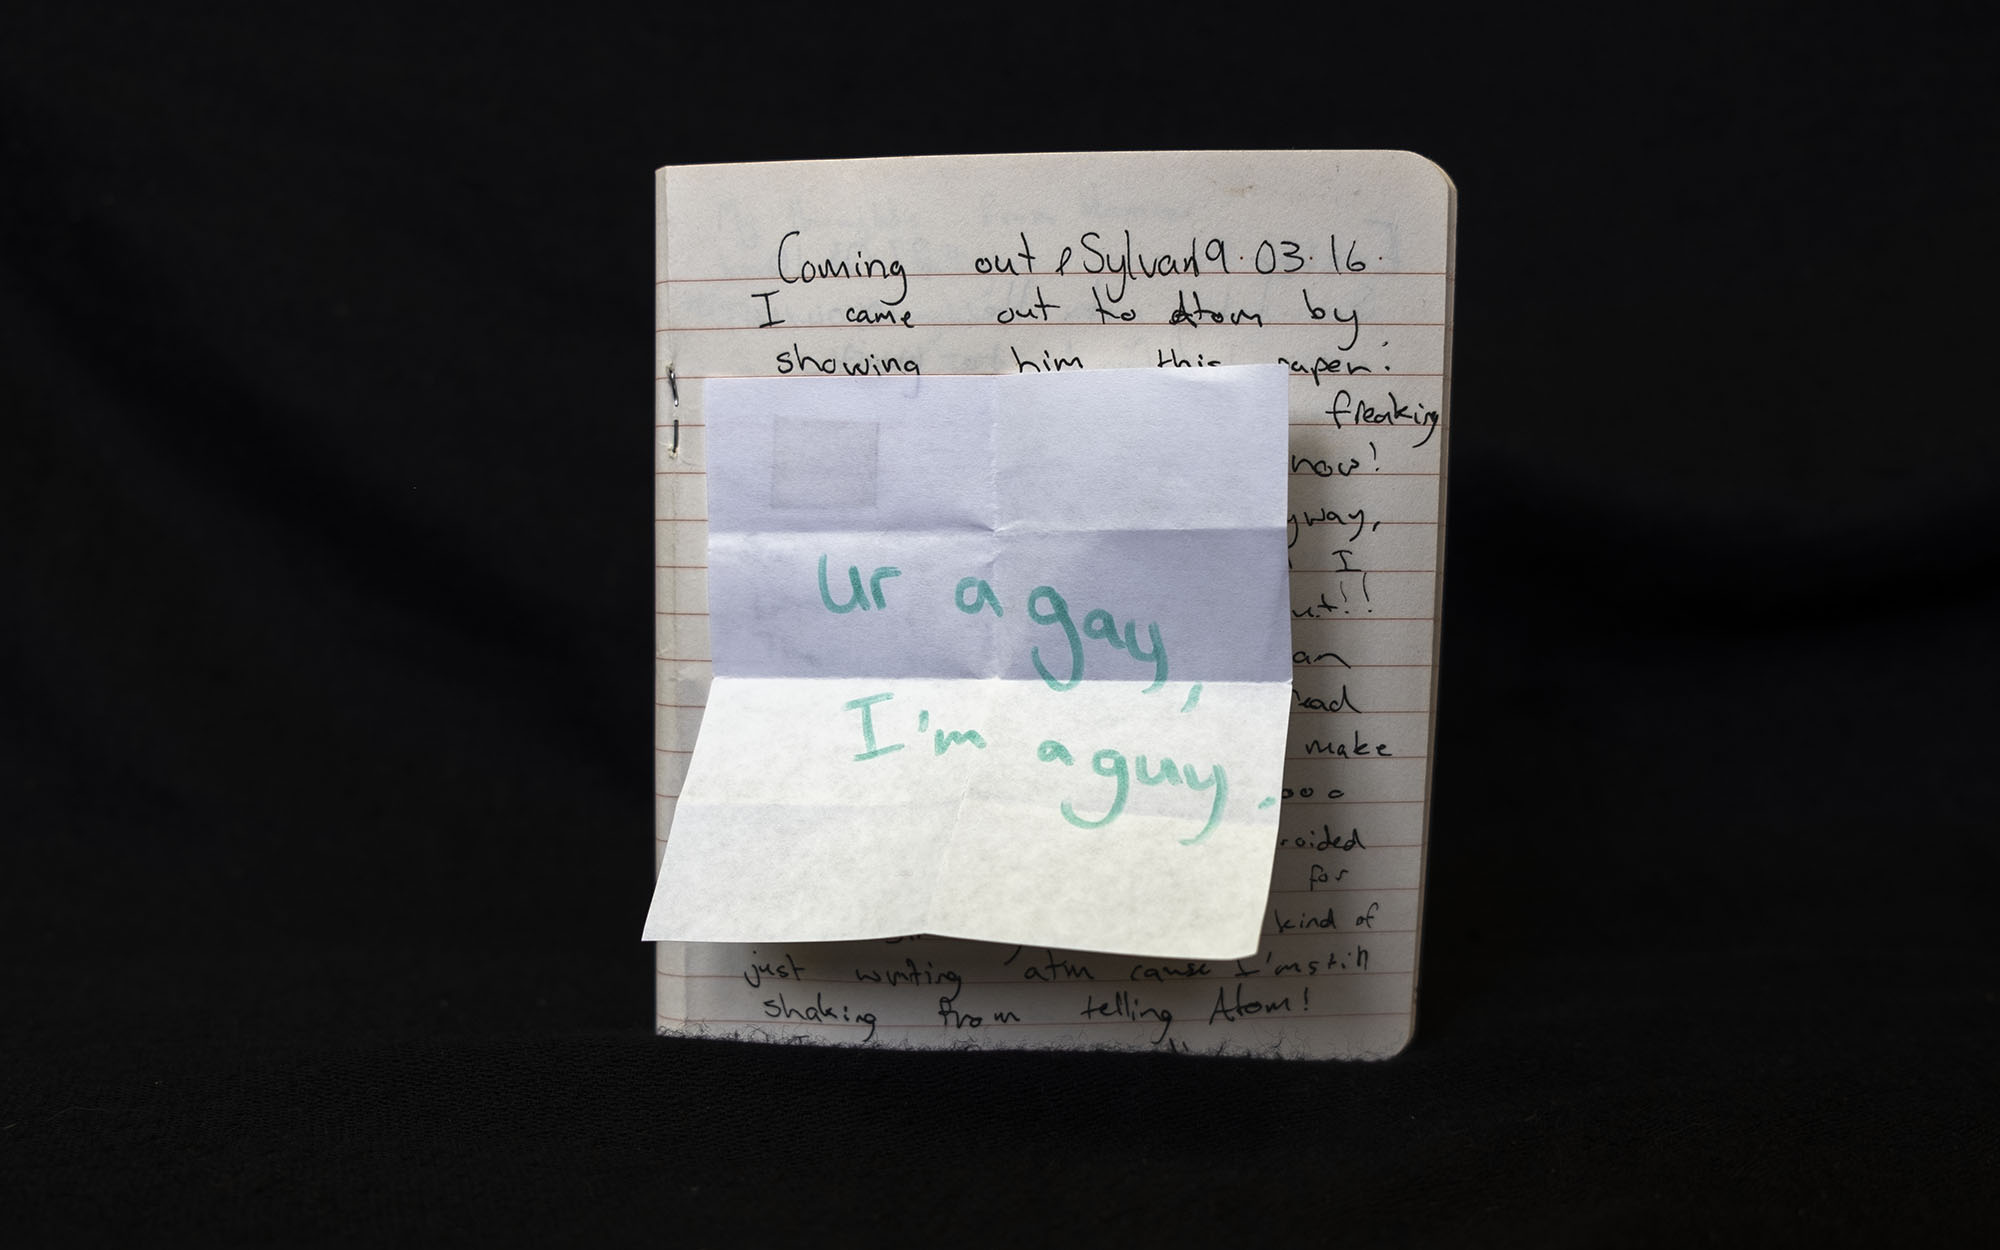 A page of a diary with a note attached to it that says "ur a gay, I'm a guy"